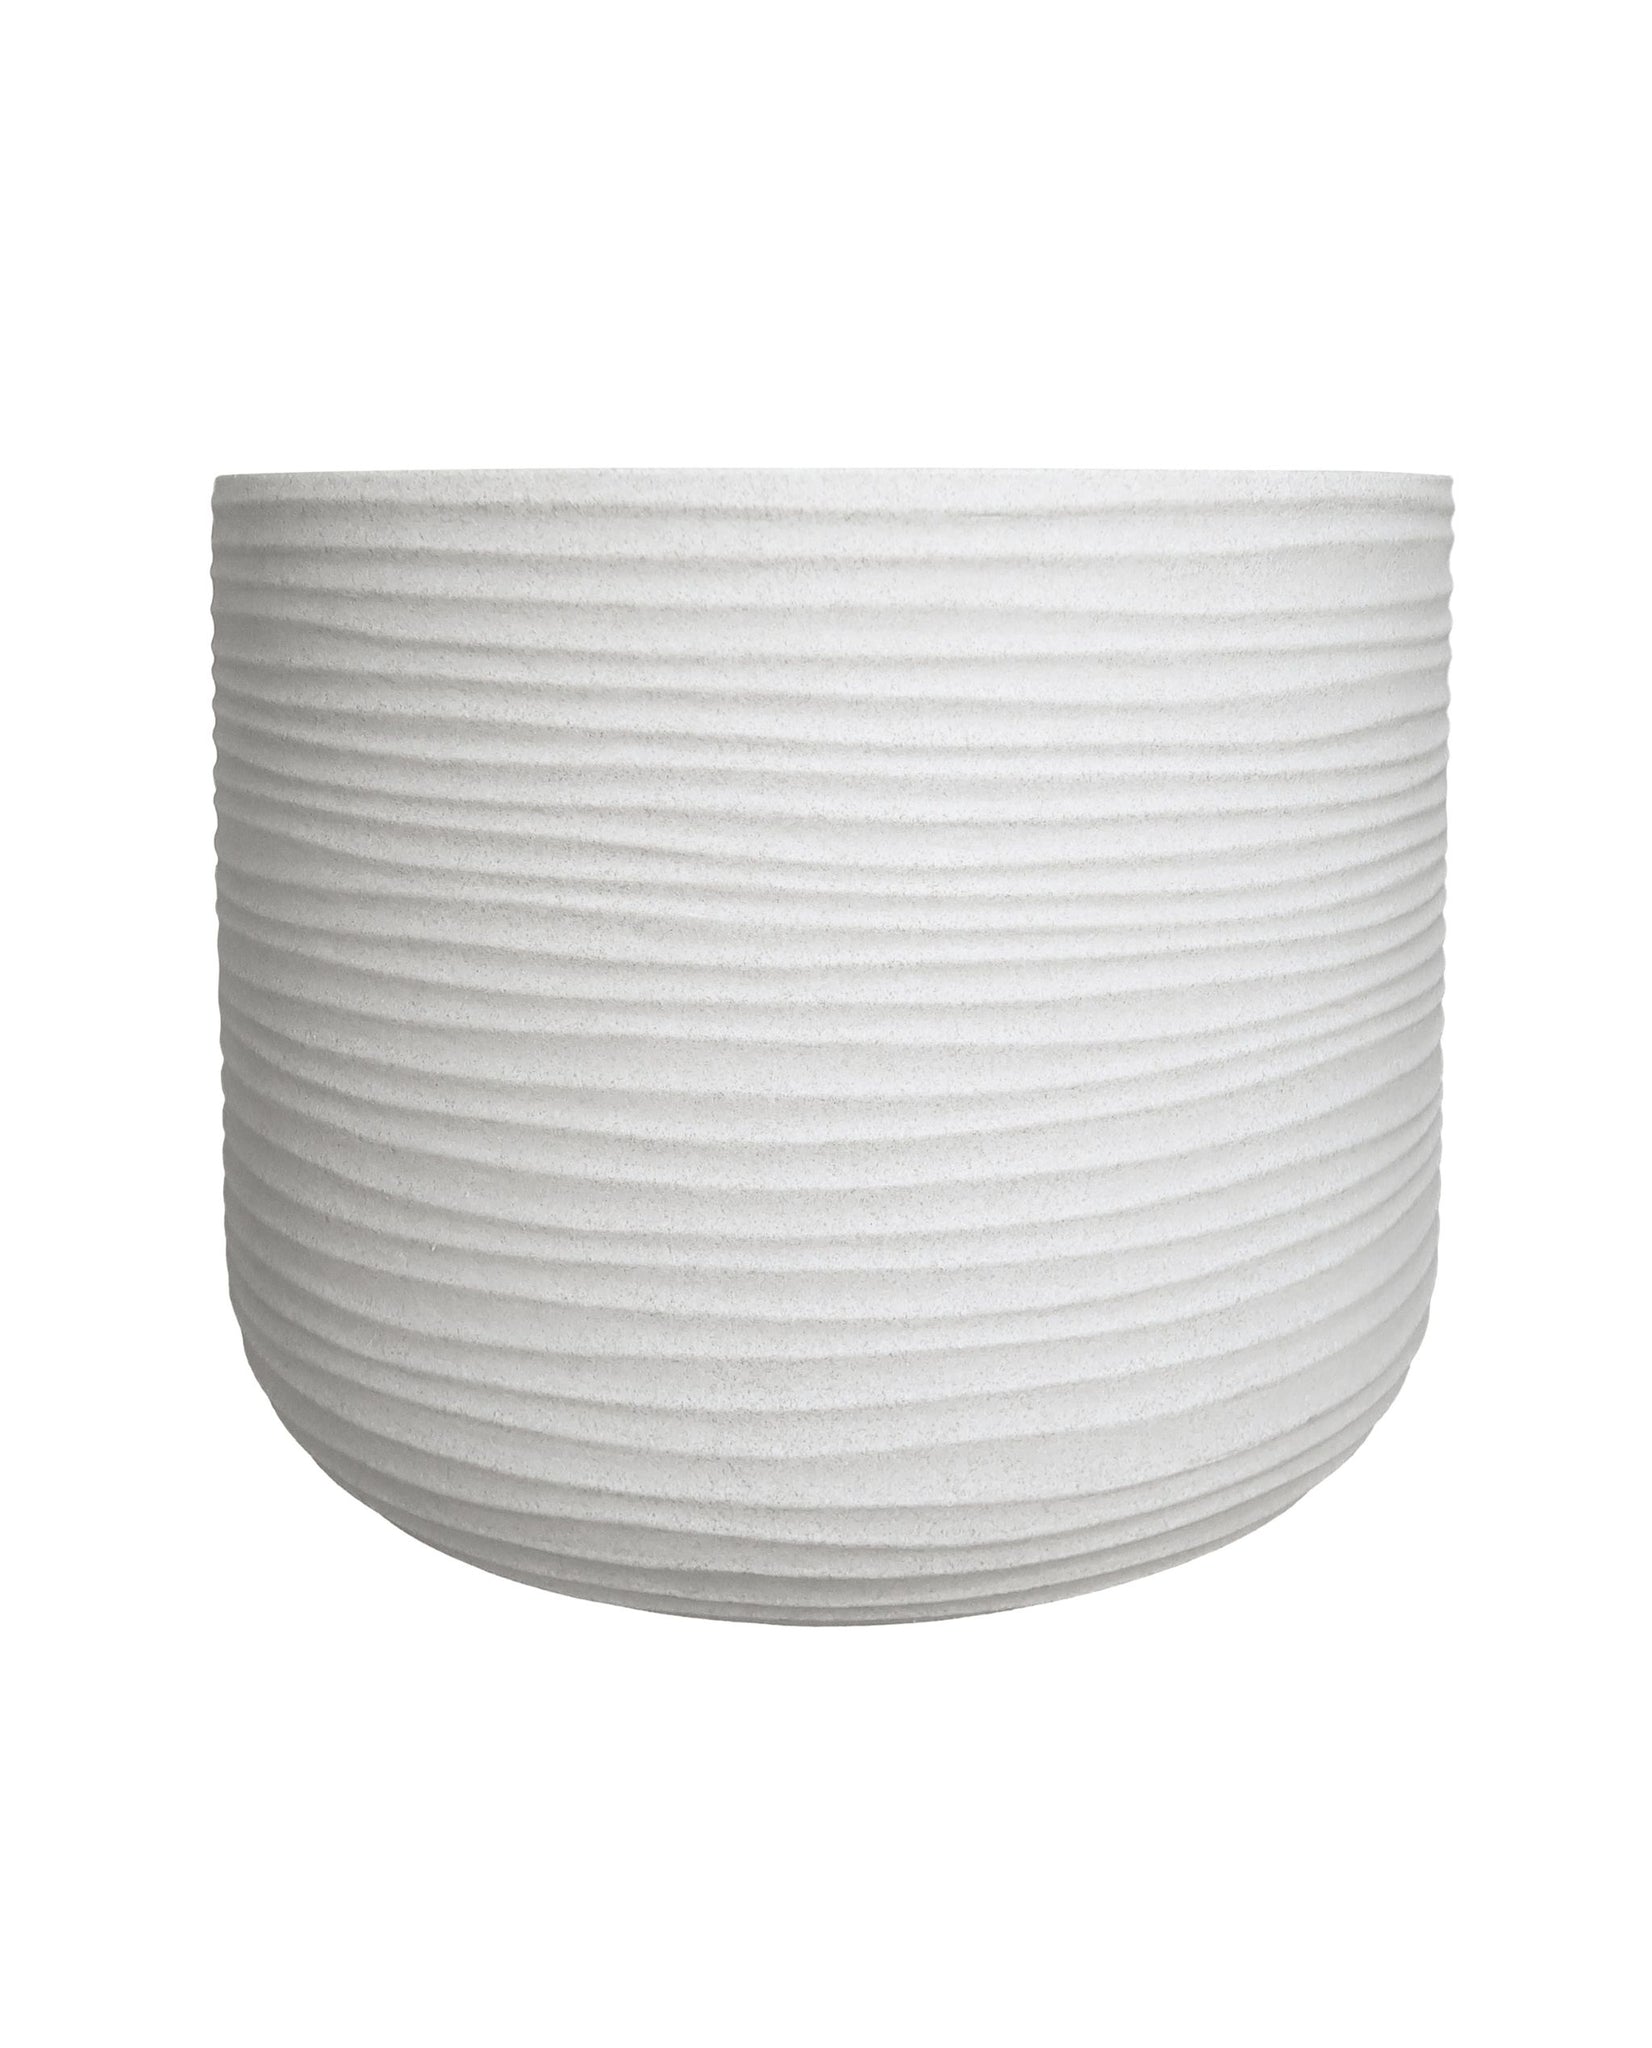 Side view of the beautiful Lagoon round Japi planter with horizontal slightly wavy lines  around the planter, adding texture,  in off white